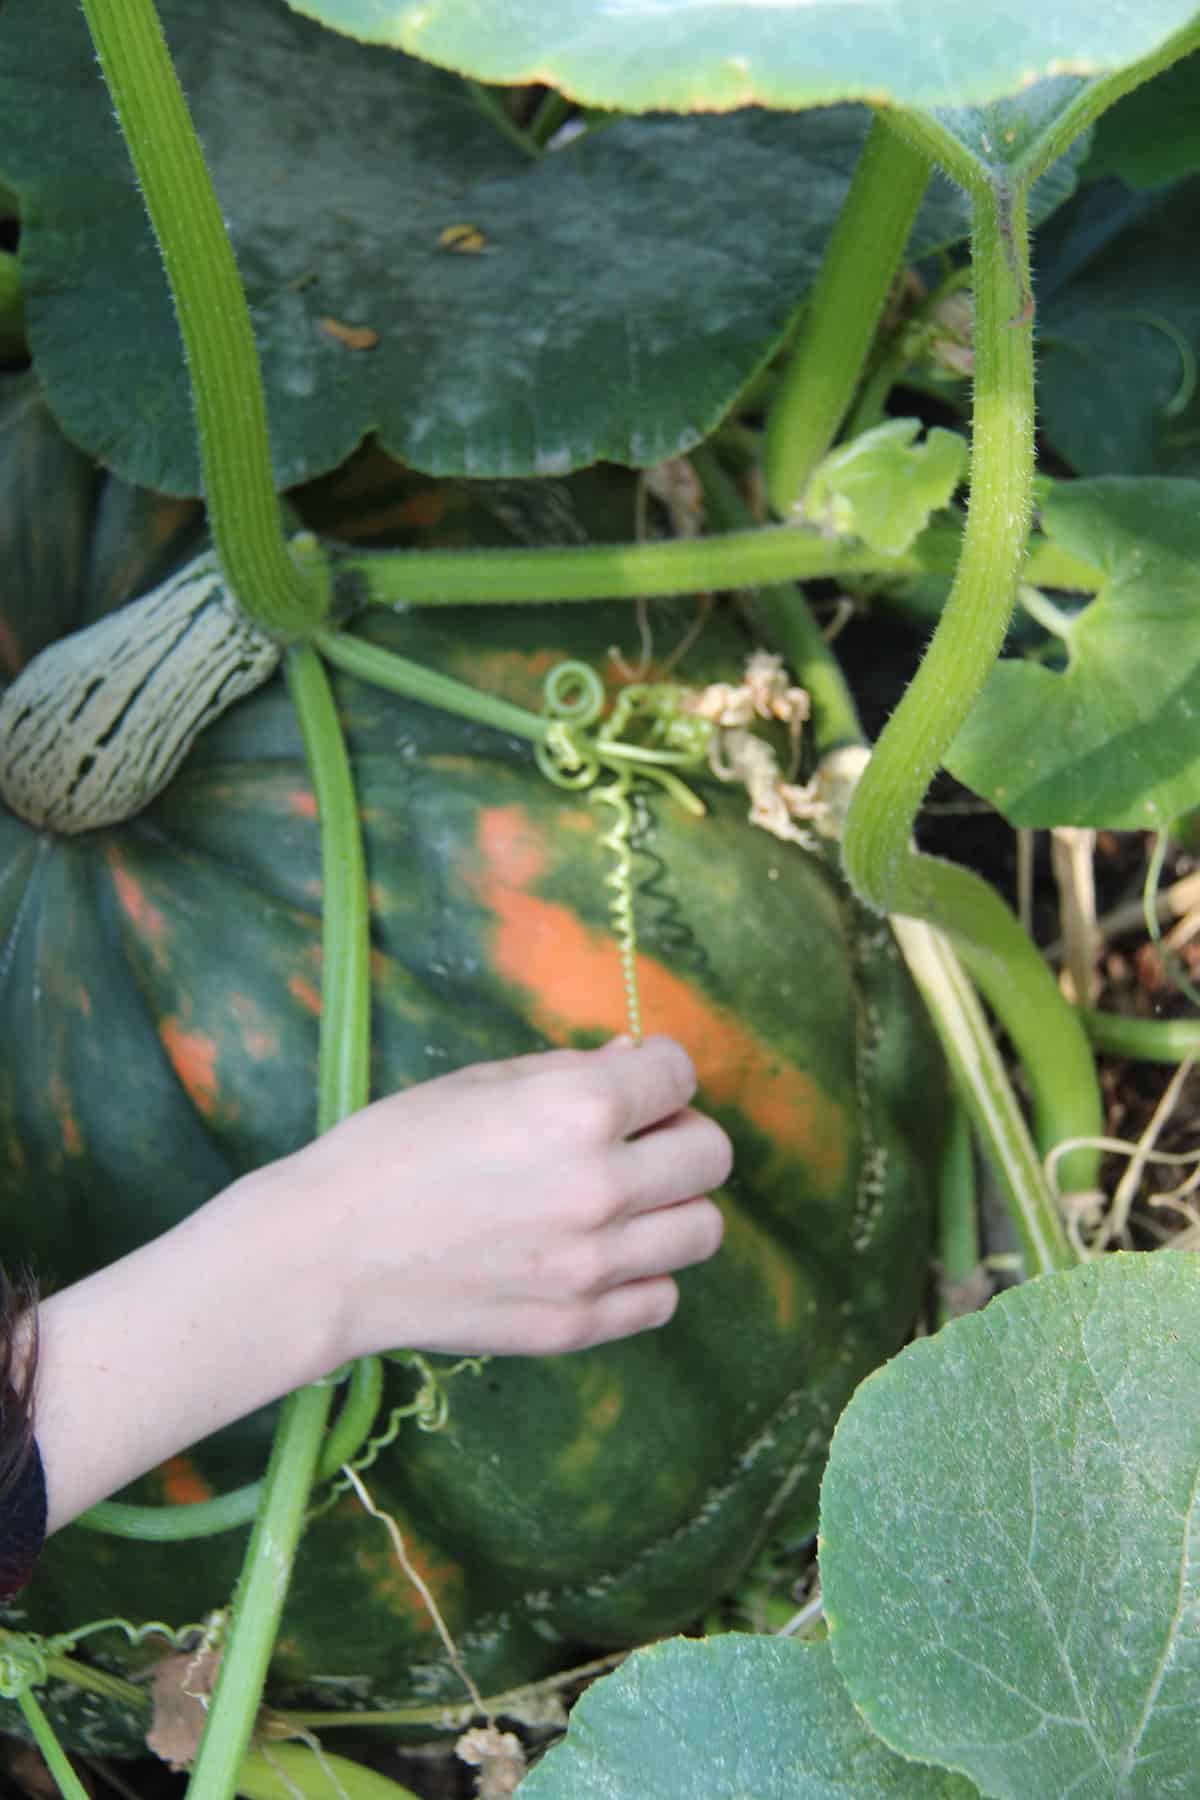 Checking on the pumpkins in the garden